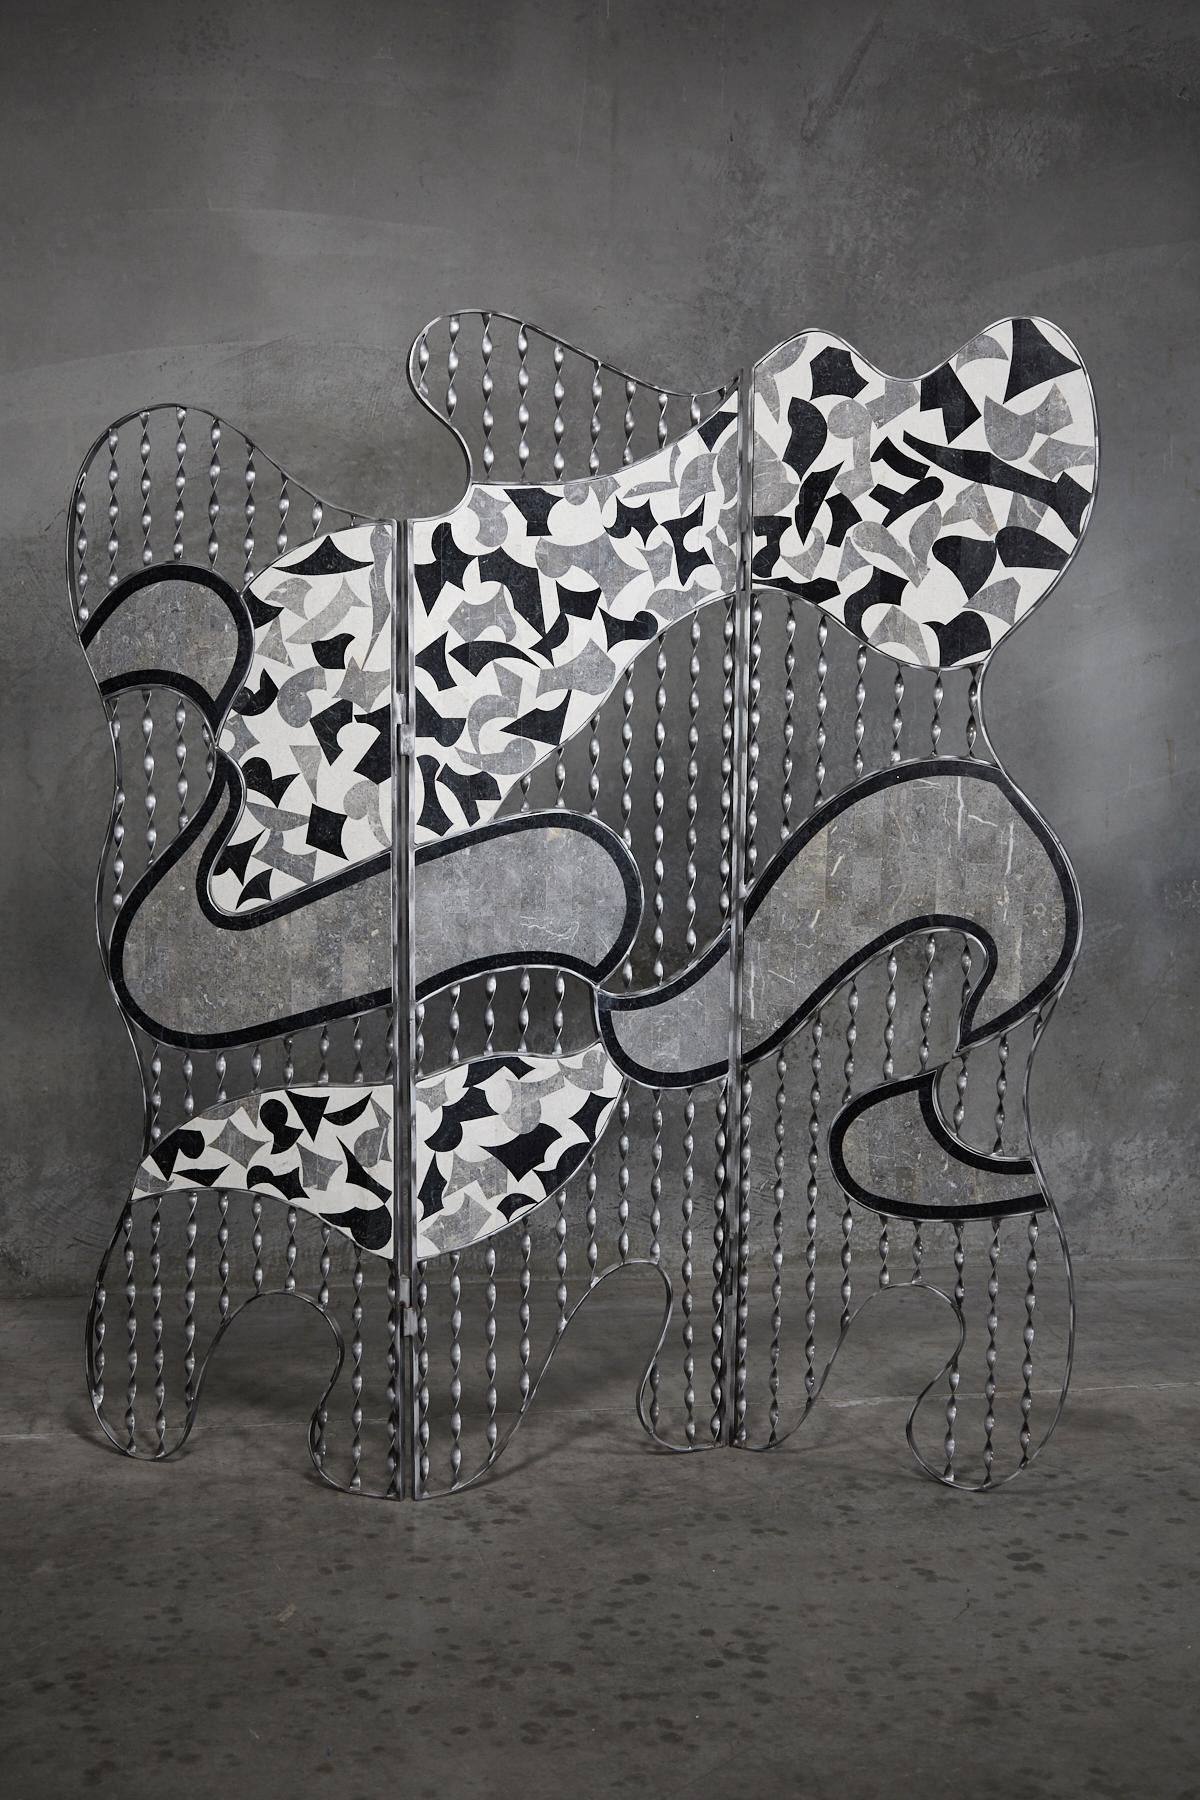 Postmodern three-panel screen with freeform shape, executed in silver toned metal, hand-twisted and partially inlaid with fun black, white and gray tessellated stone patterns.

All furnishings are made from 100% natural Fossil Stone or Seashell